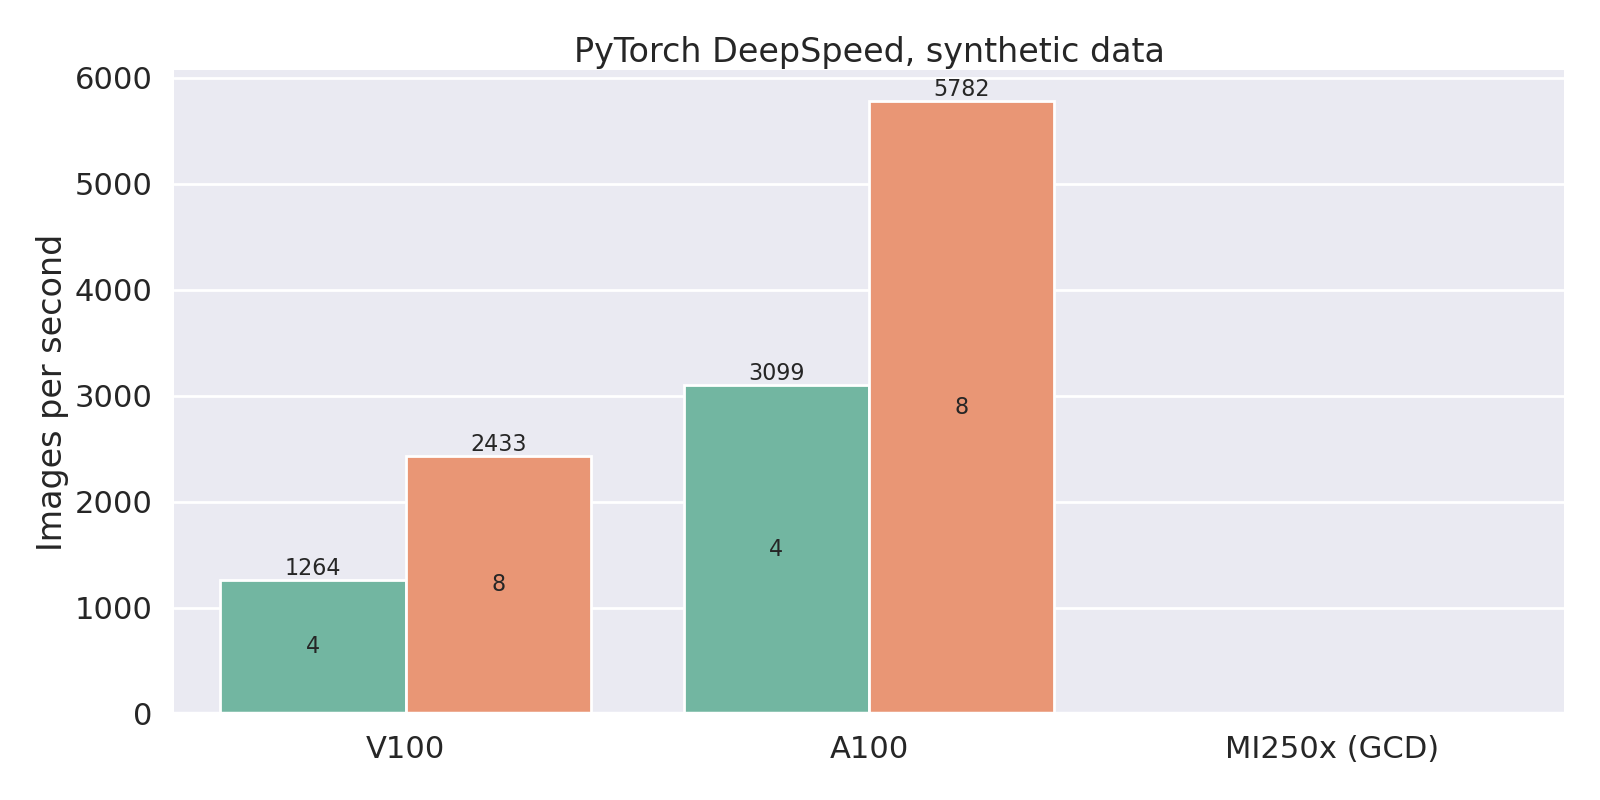 PyTorch deepspeed results chart